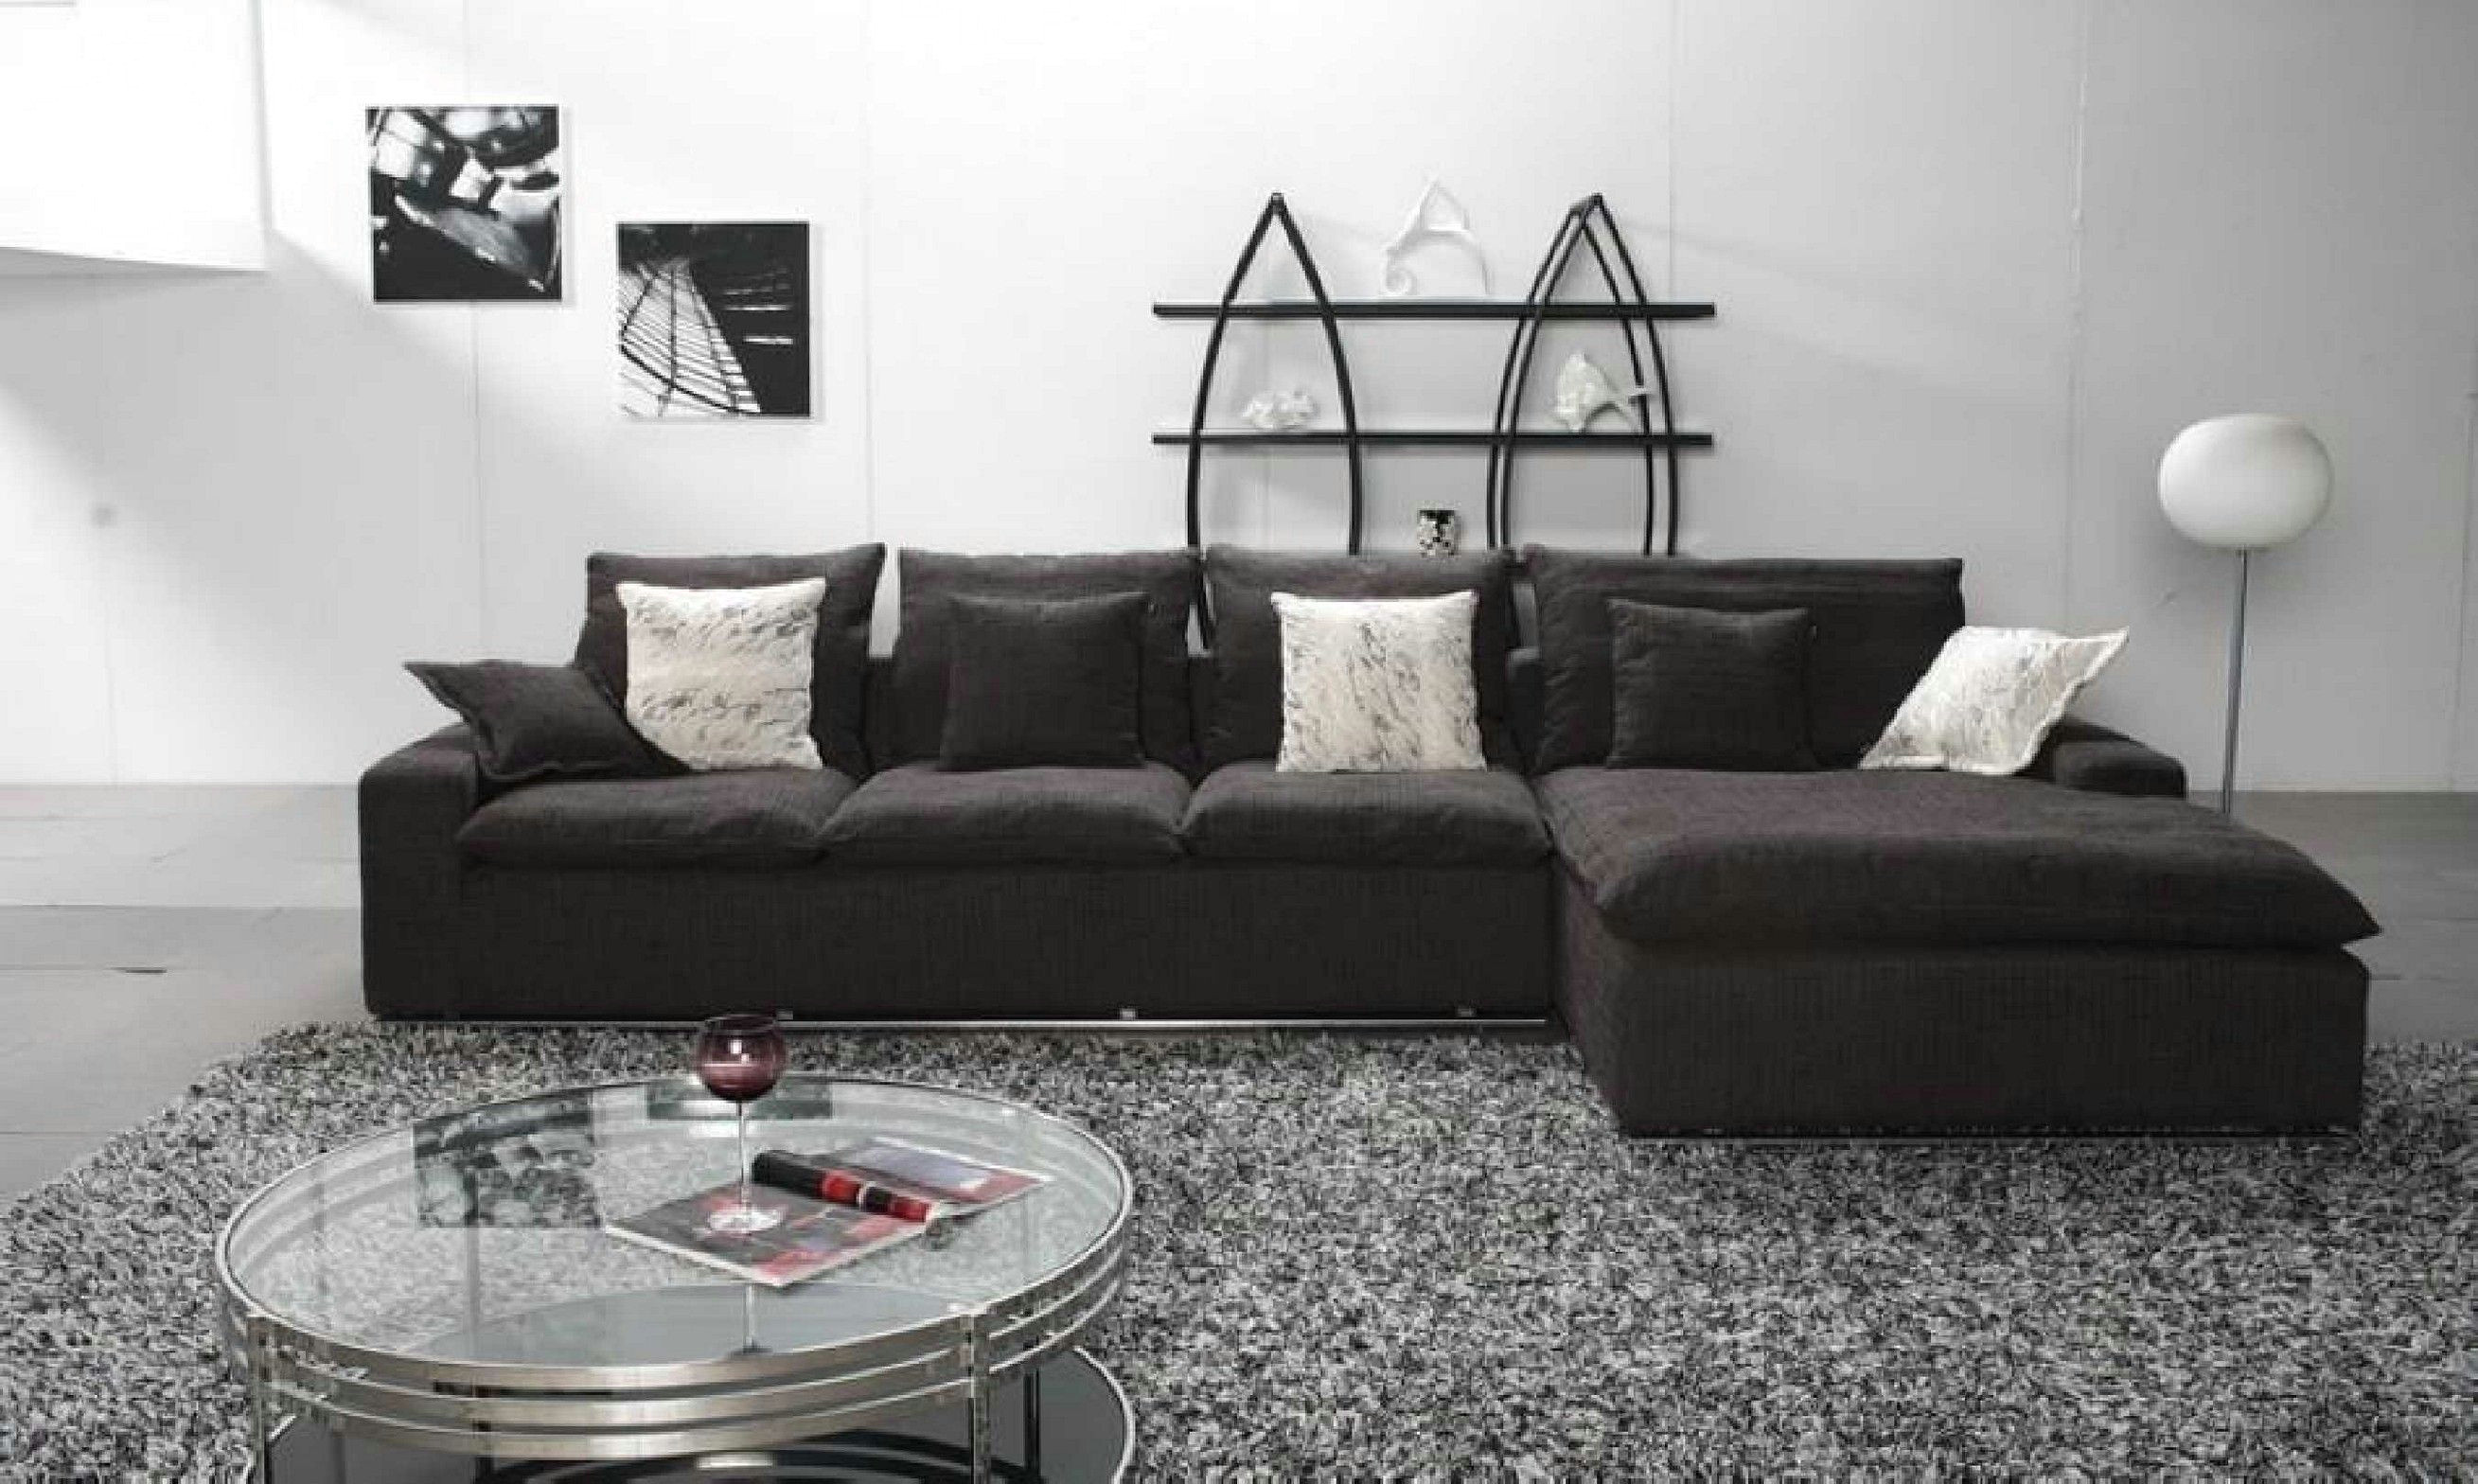 Drawing L Shape sofa Most Comfortable L Shaped Couch Ever Wish List for House sofa